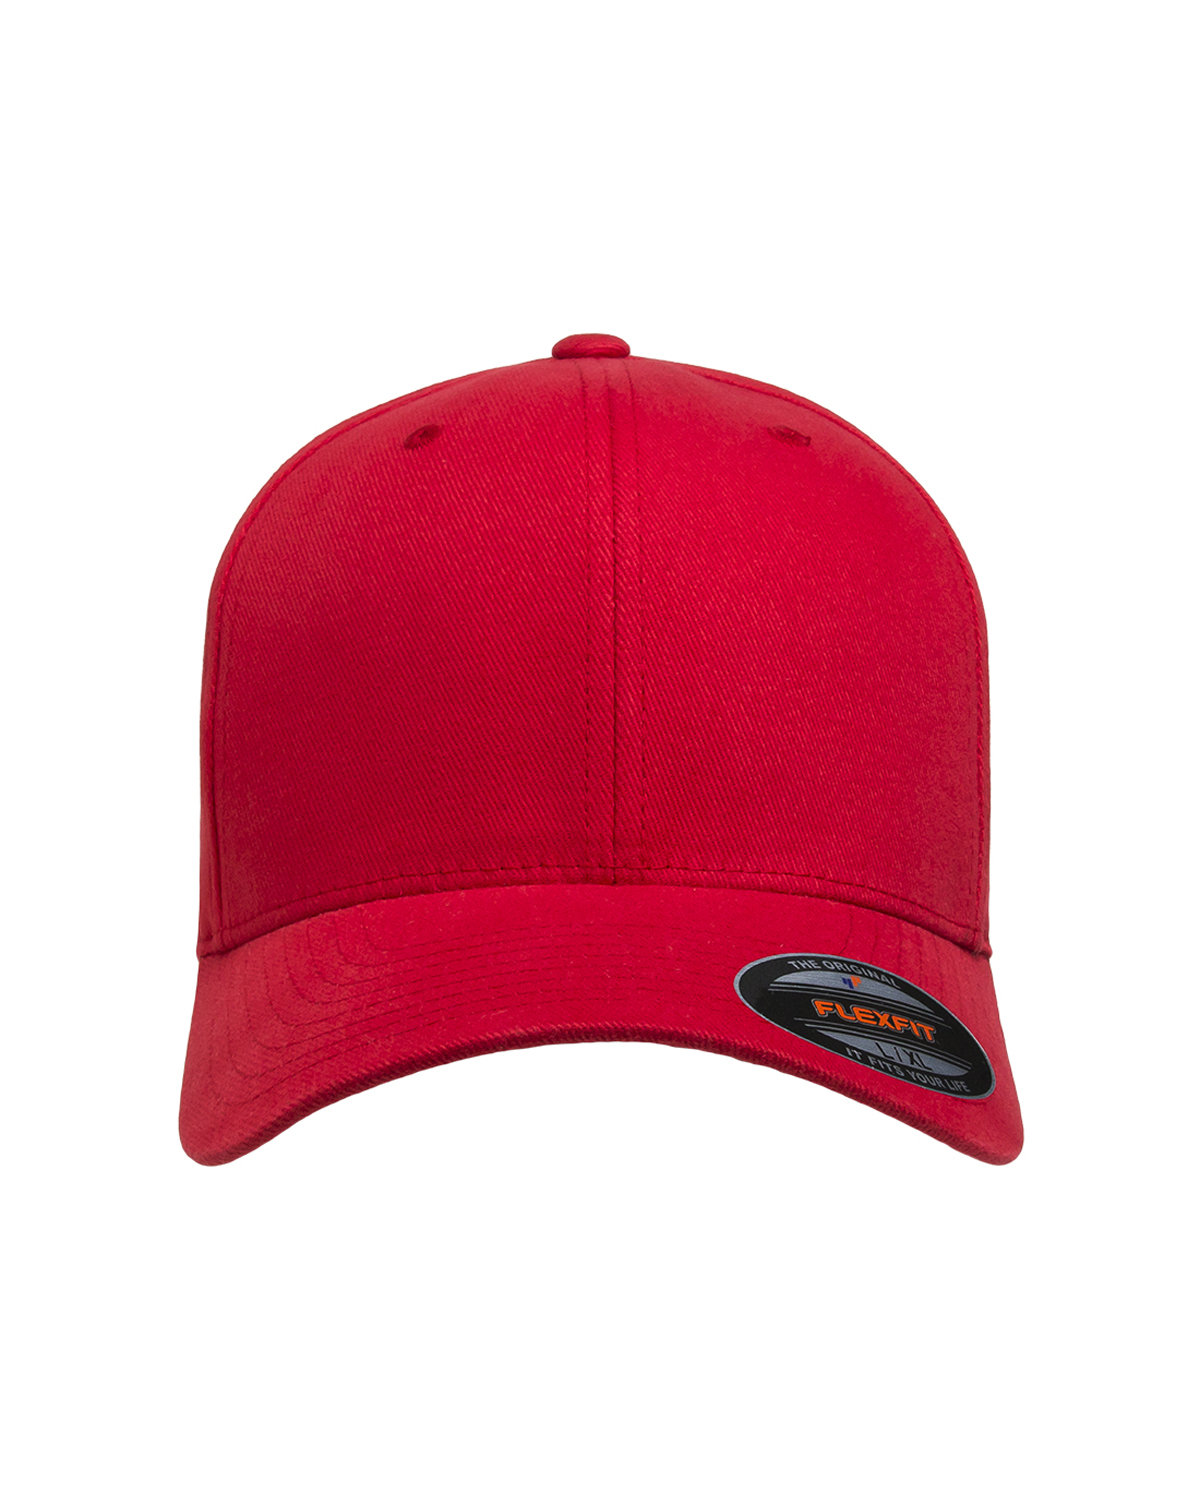 Flexfit Adult Brushed Twill Cap RED 